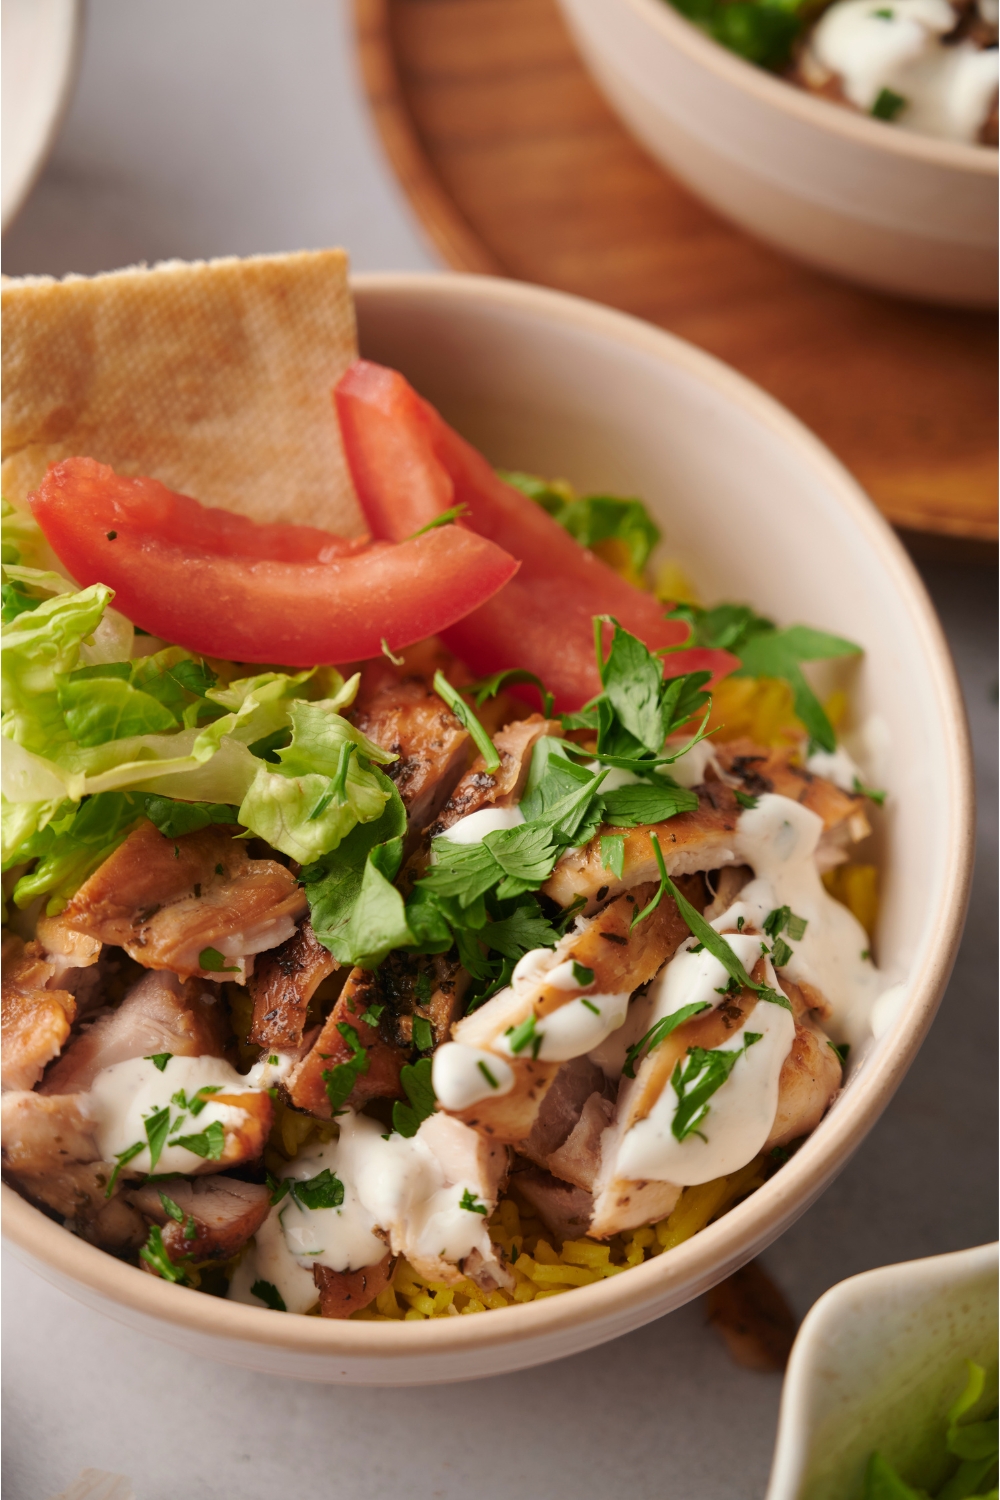 Halal chicken over rice garnished with fresh parsley, shredded lettuce, tomato, and a piece of pita bread.